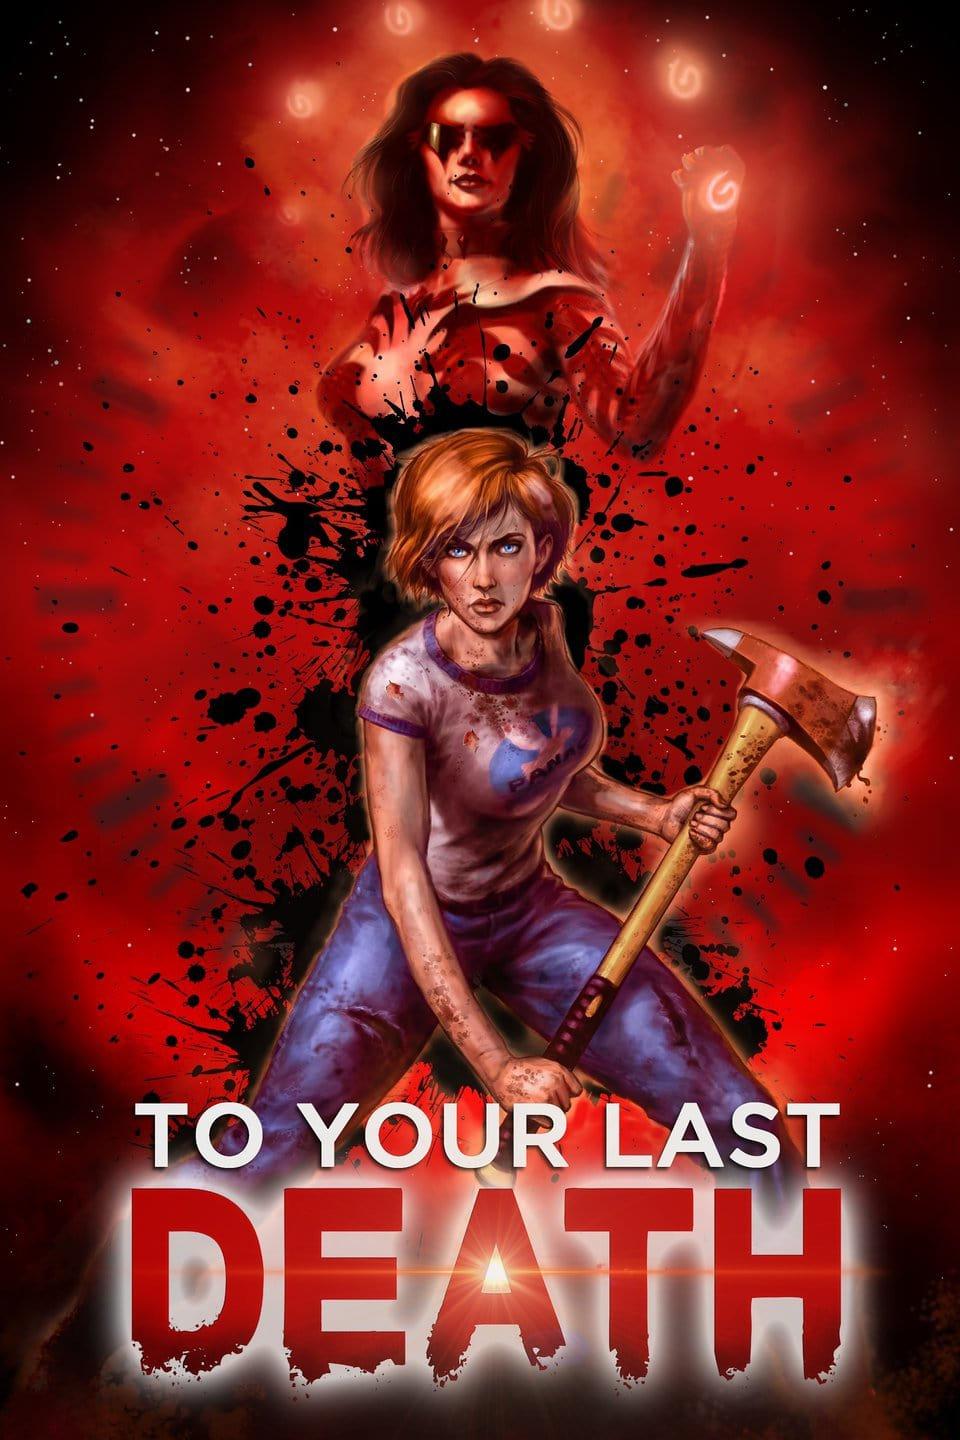 To Your Last Death poster